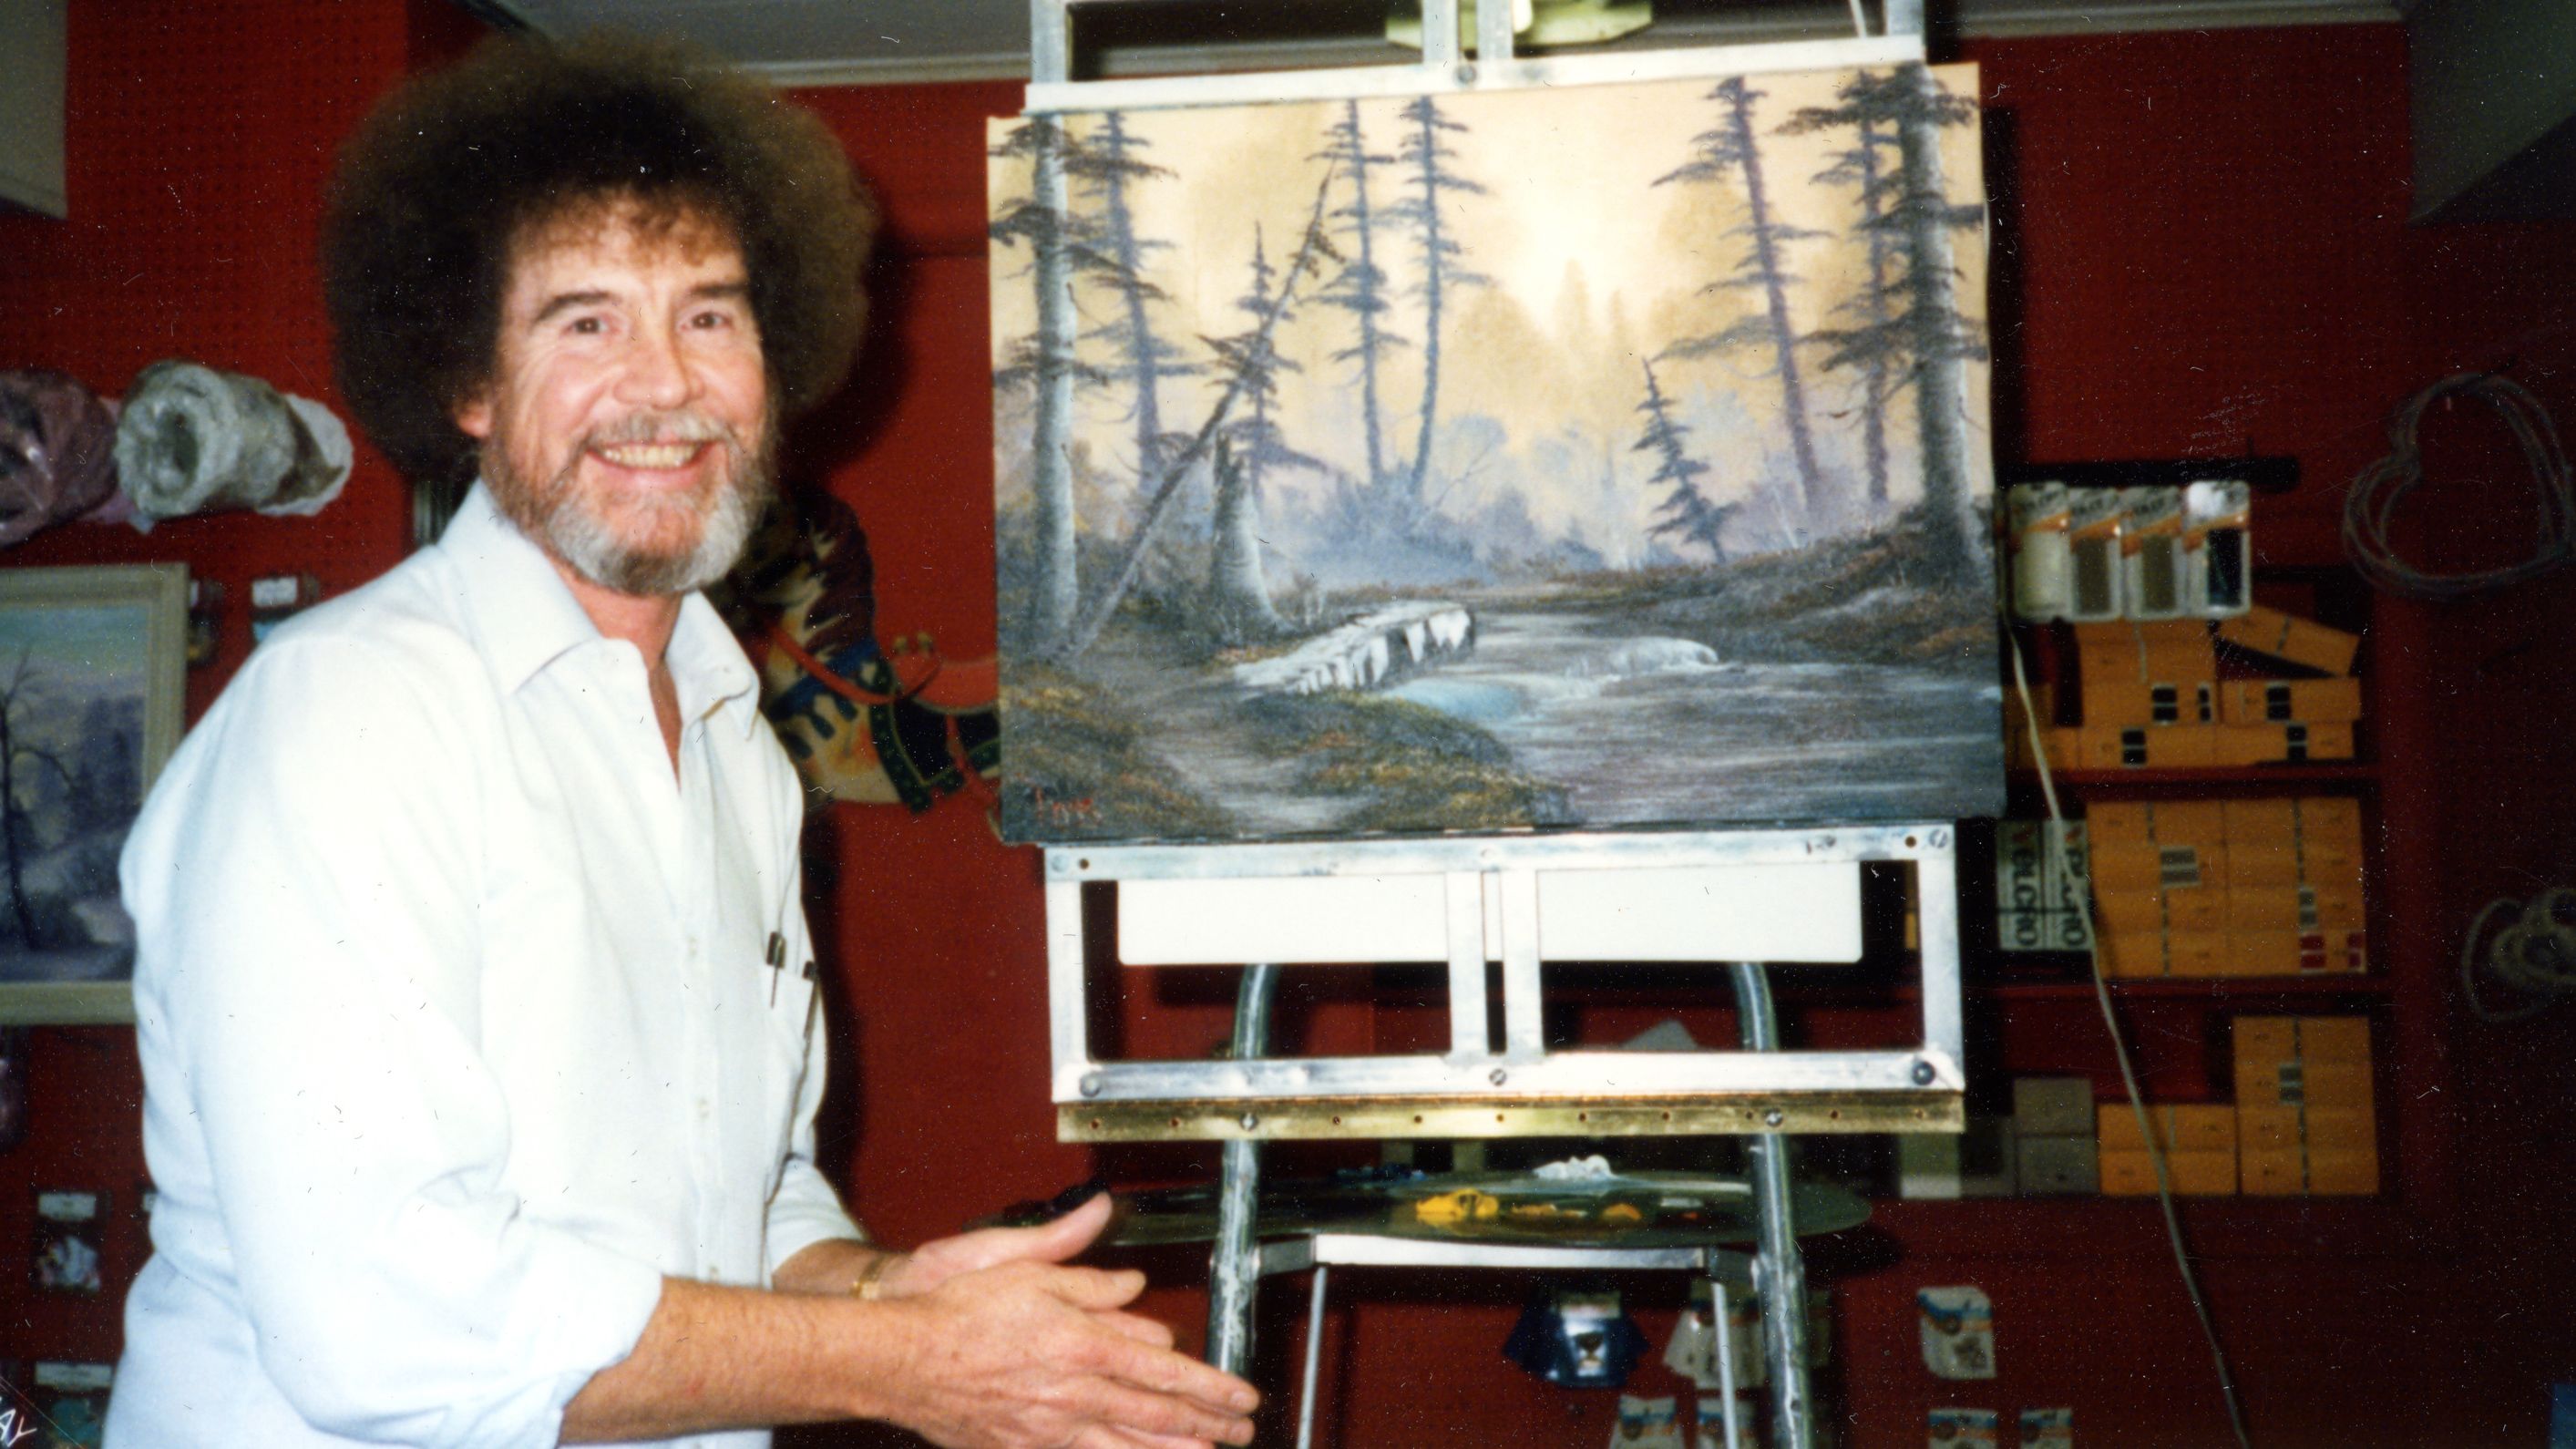 Bob Ross Documentary Complicates The Legacy Of An Artist Who Painted 'Happy  Little Trees' | Cnn